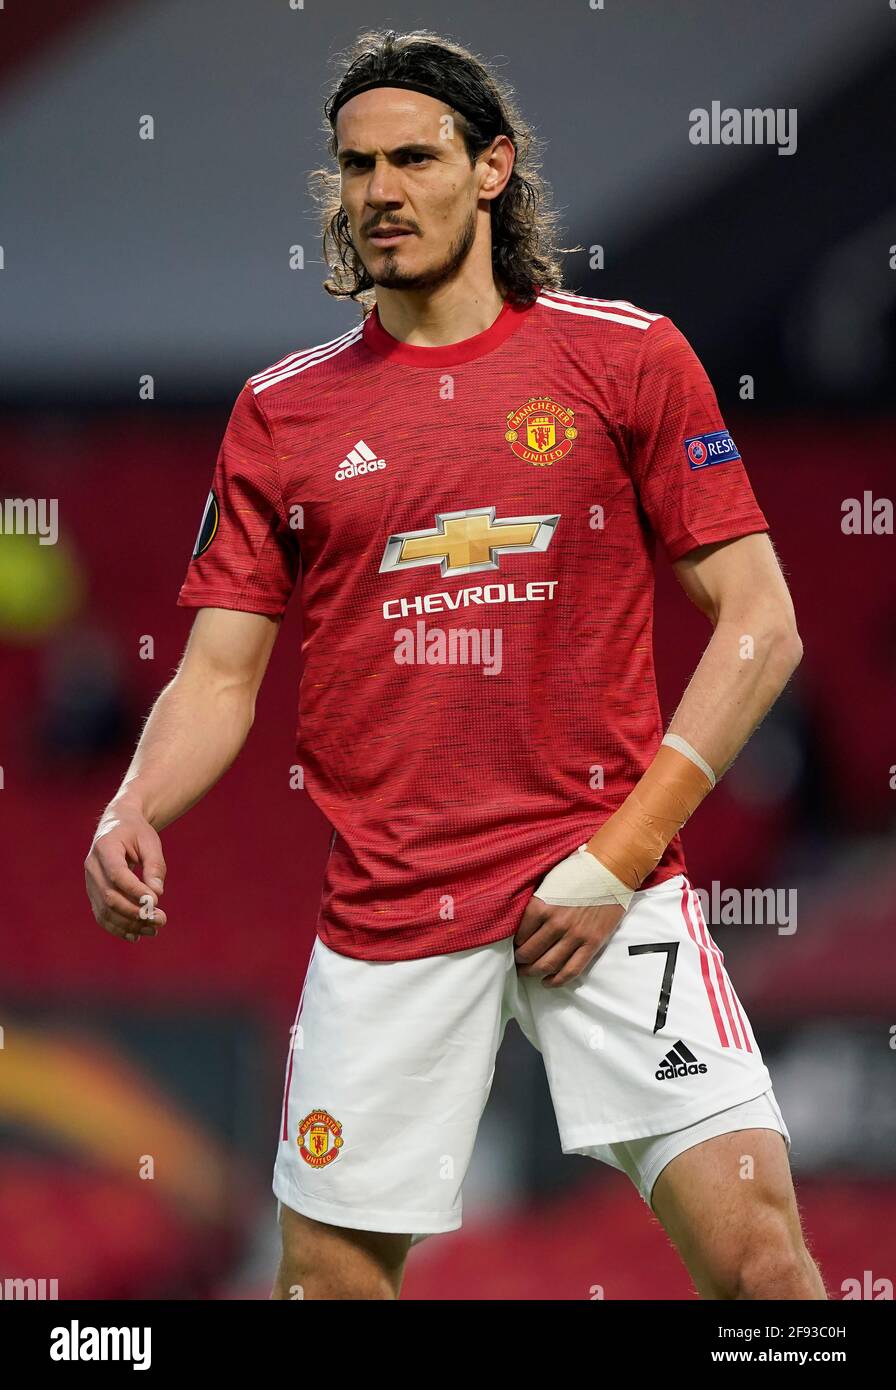 Manchester, England, 15th April 2021. Edison Cavani of Manchester United  during the UEFA Europa League match at Old Trafford, Manchester. Picture  credit should read: Andrew Yates / Sportimage Stock Photo - Alamy